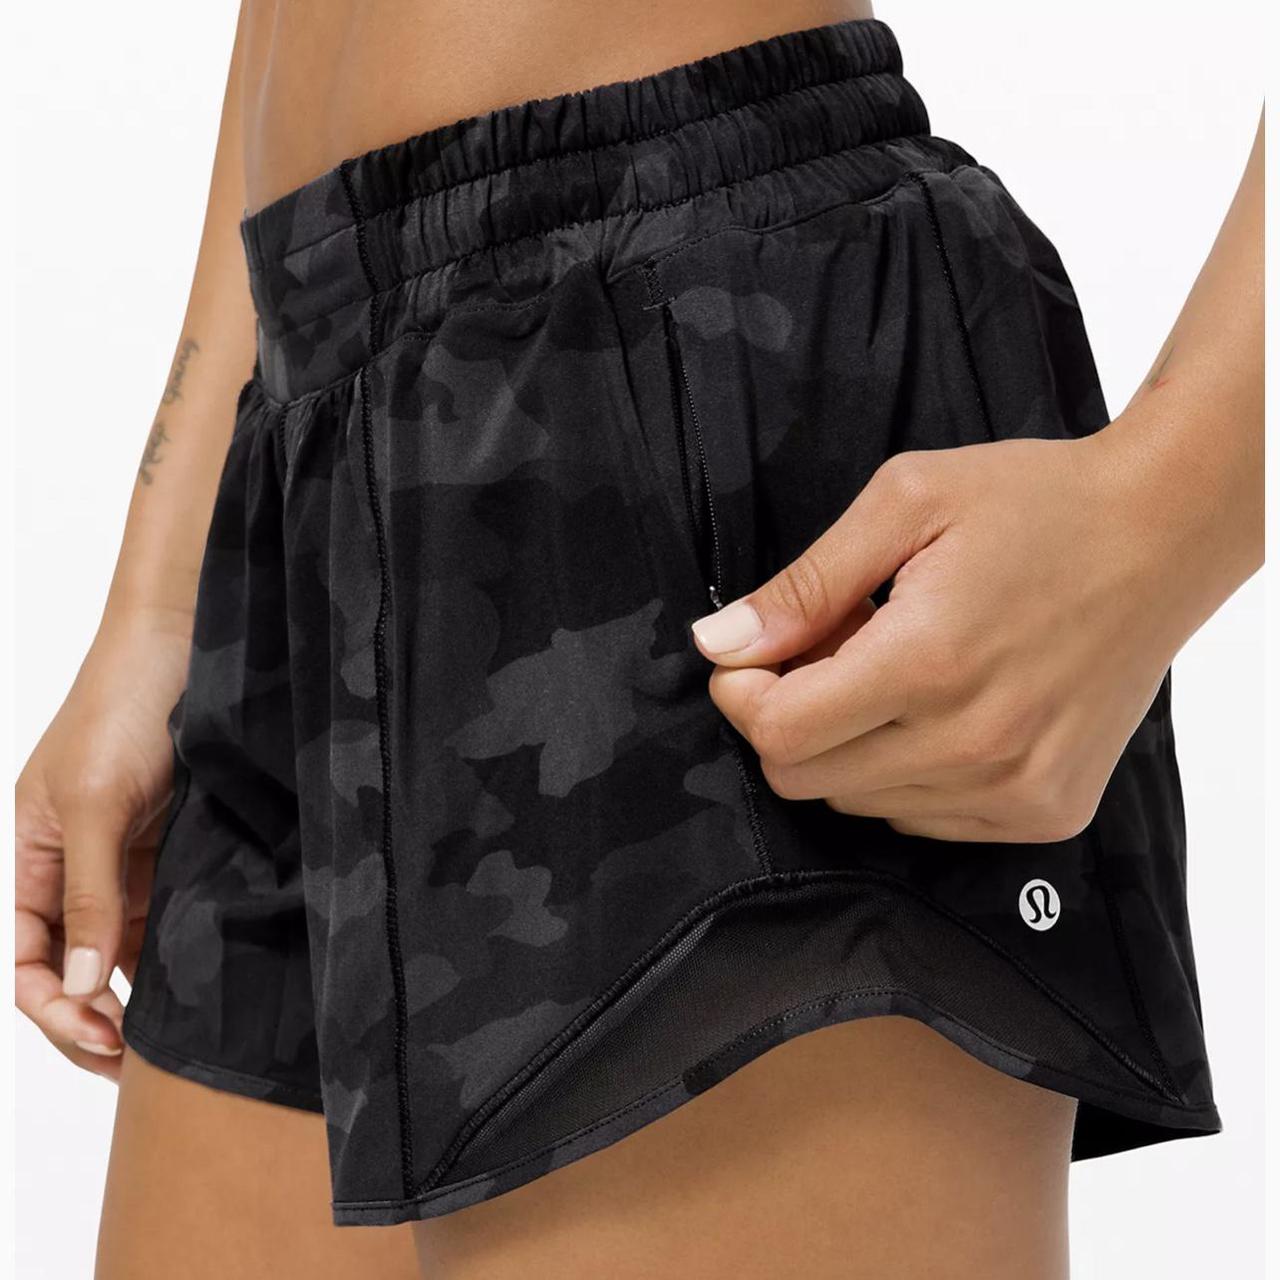 Lulu black camo shorts. Great condition worn once. - Depop